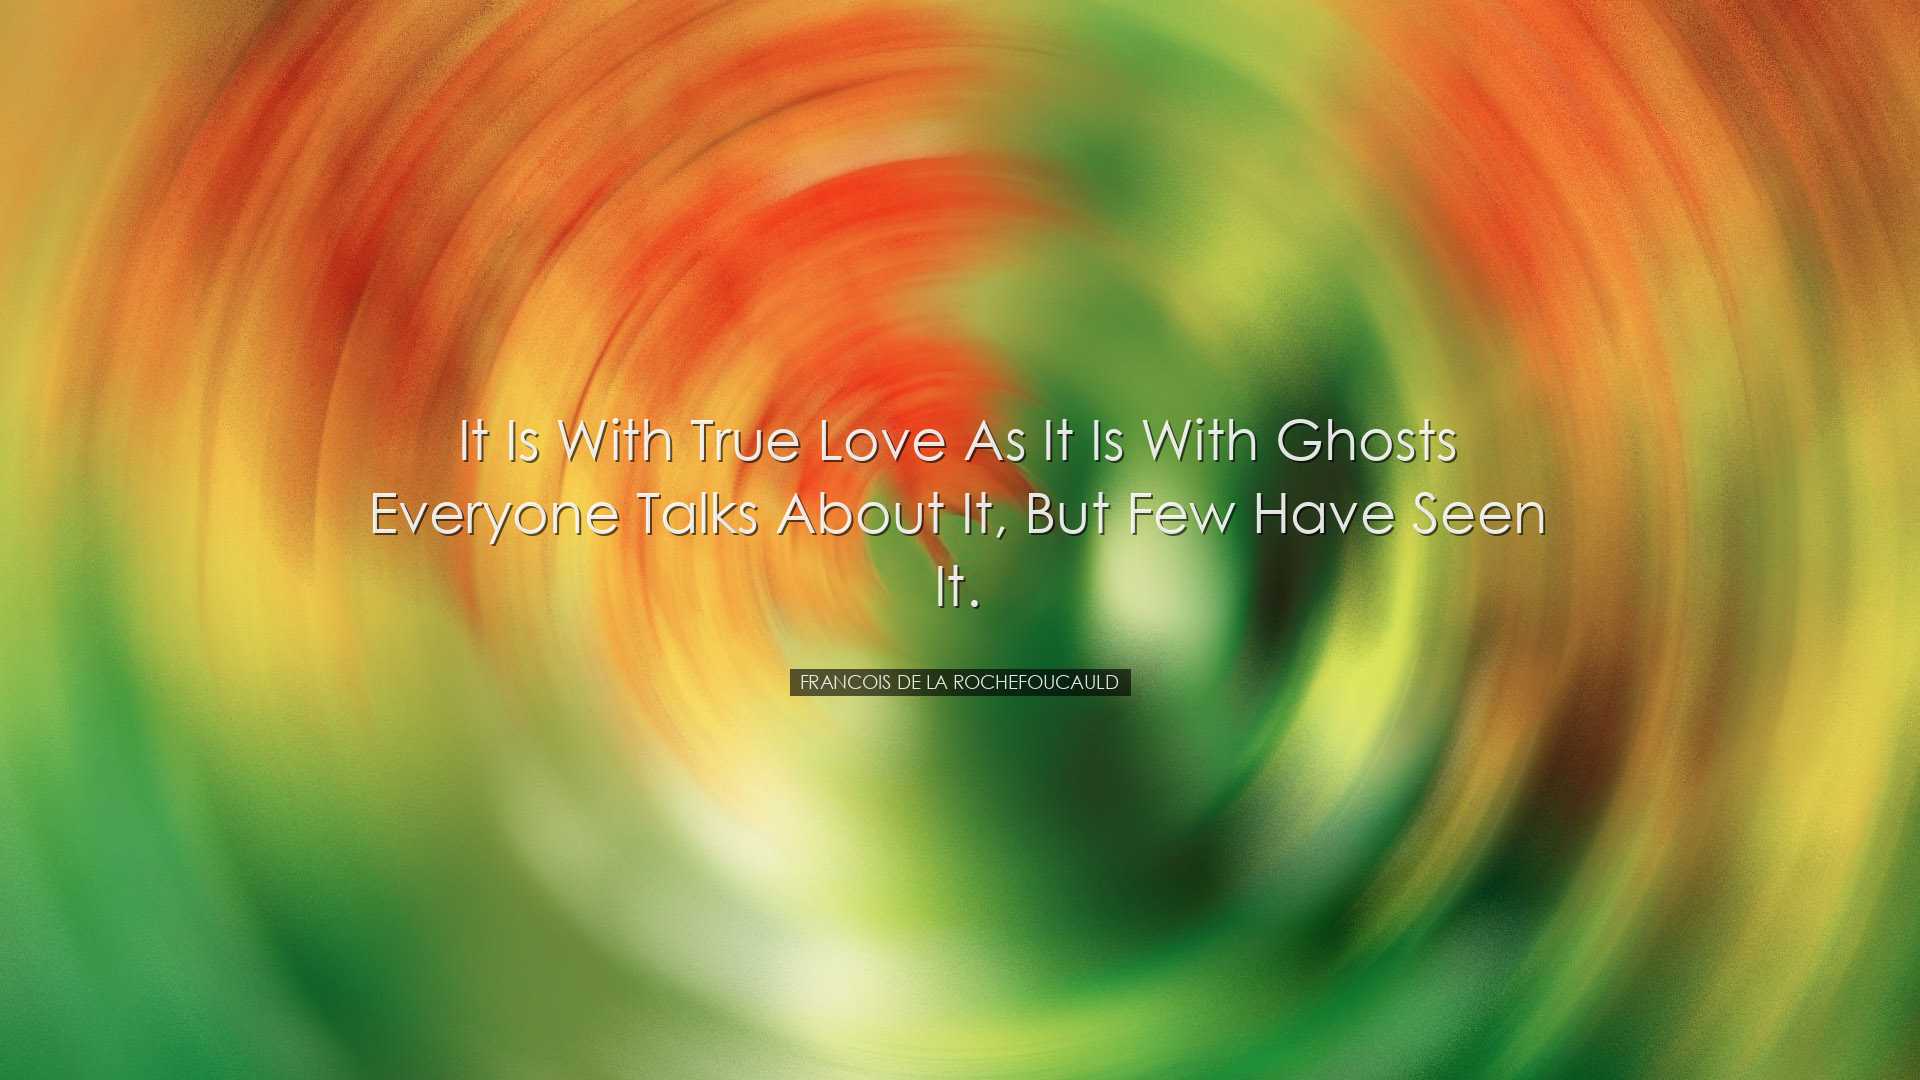 It is with true love as it is with ghosts everyone talks about it,